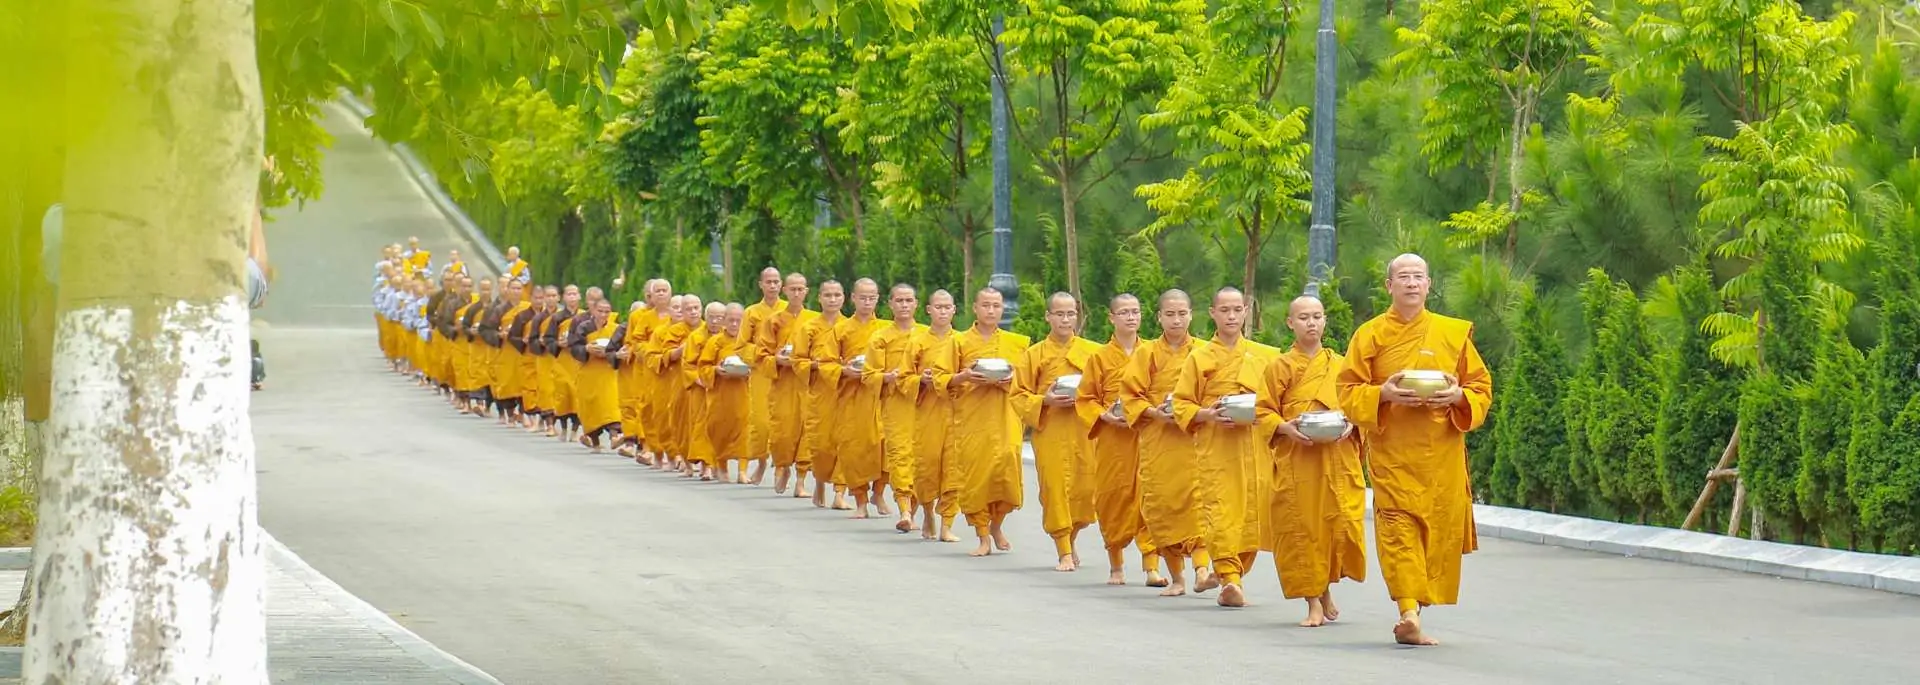 Buddhist meditation retreat in Vietnam: what to expect?